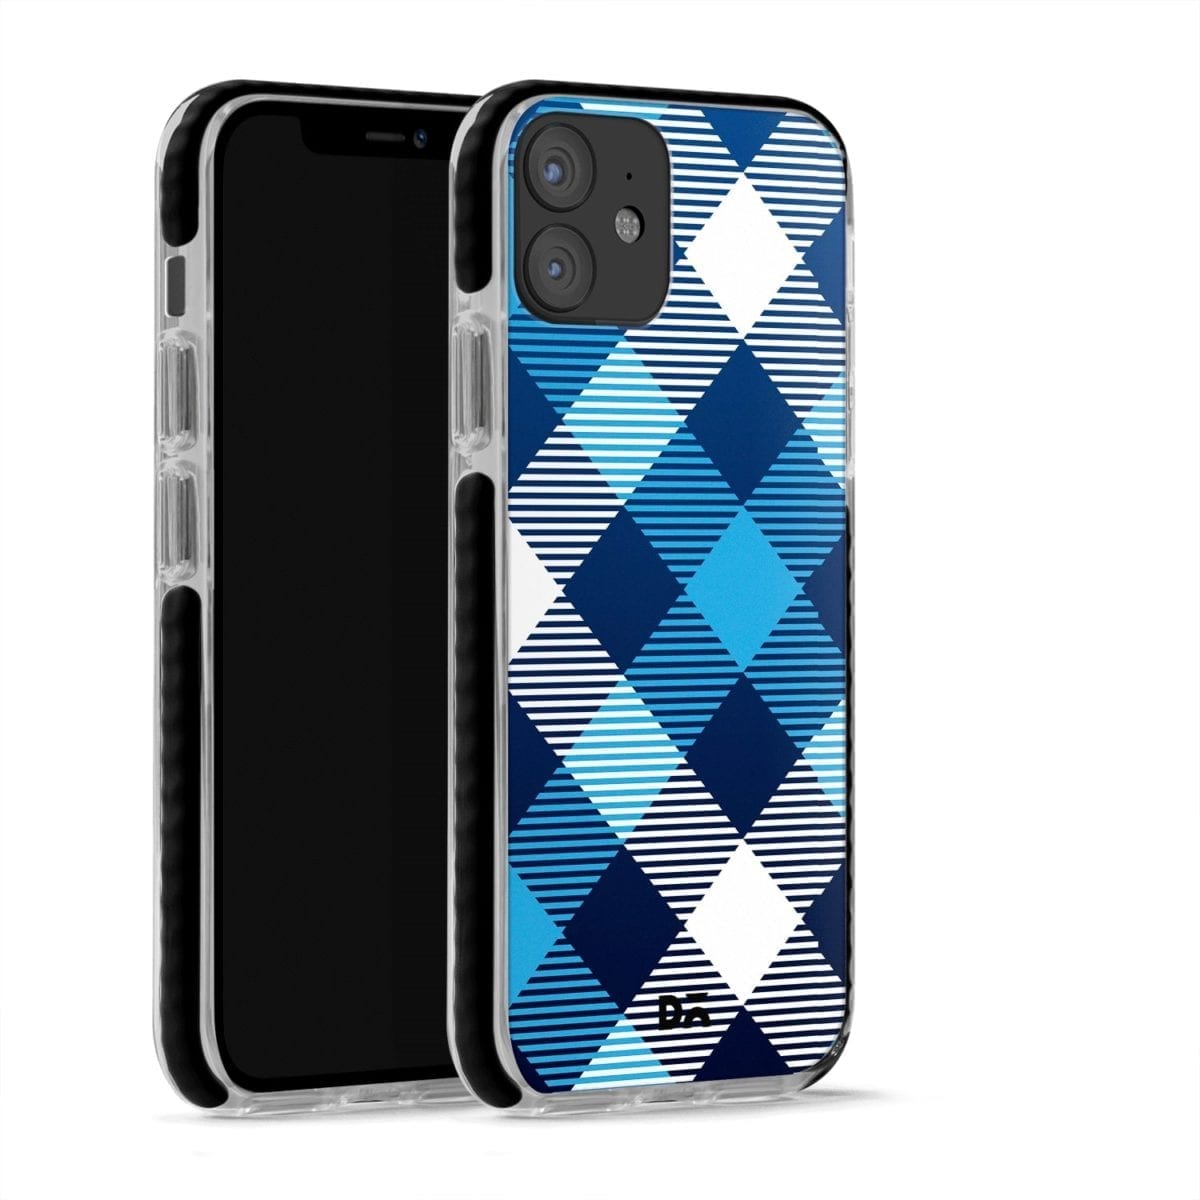 Medium Static Nightfall Checks Stride Case Cover for Apple iPhone 12 Mini and Apple iPhone 12 with great design and shock proof | Klippik | Online Shopping | Kuwait UAE Saudi